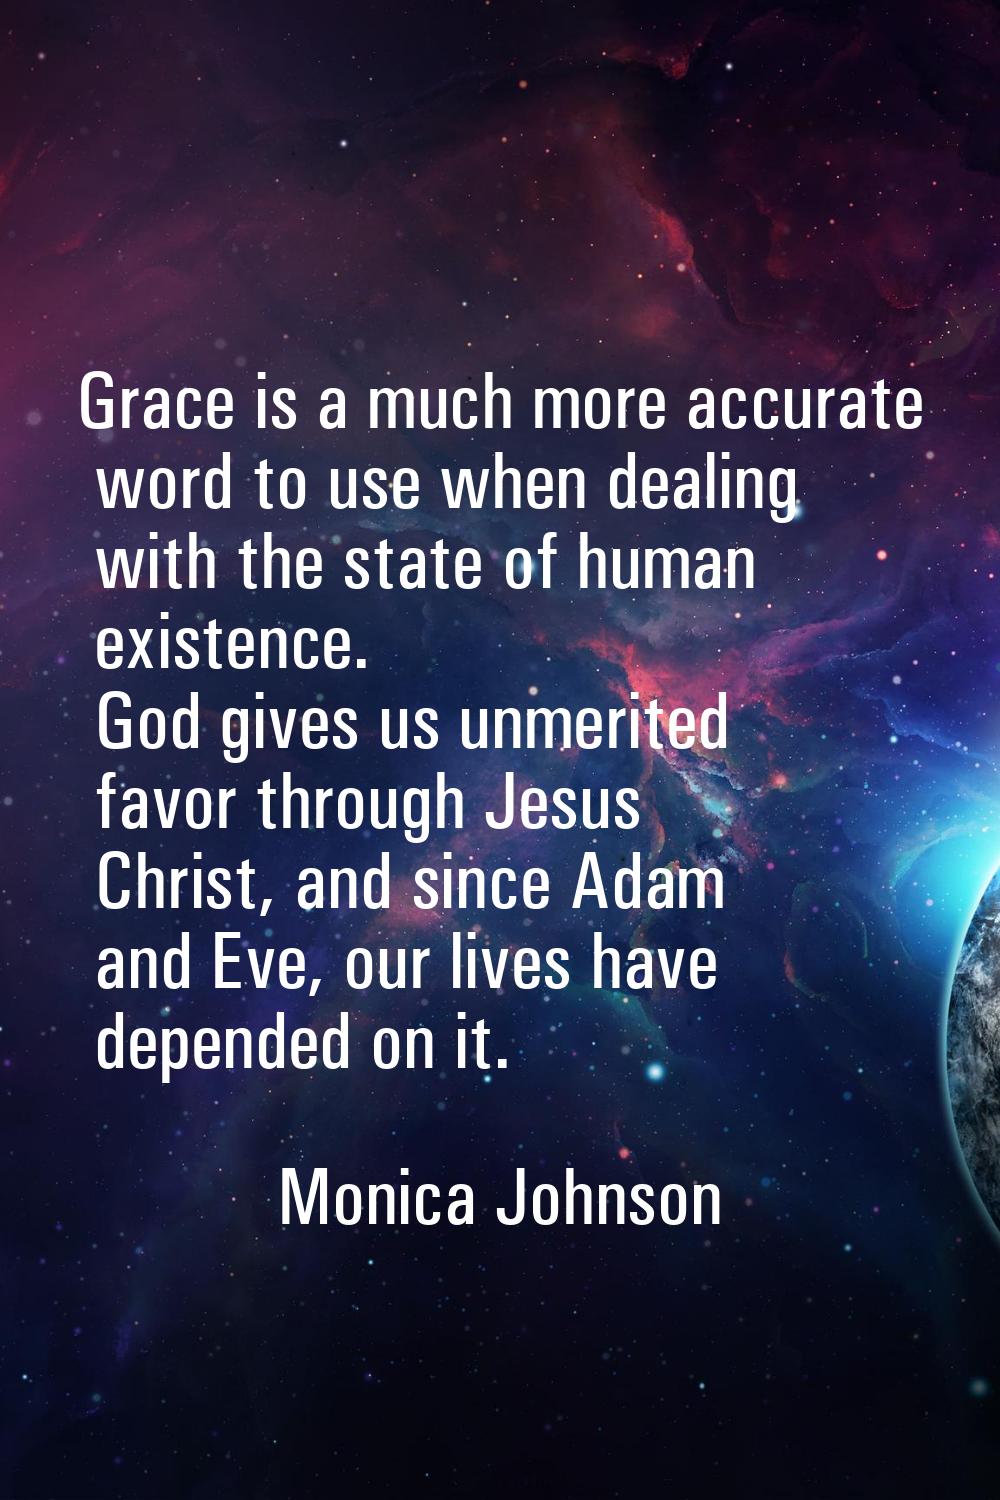 Grace is a much more accurate word to use when dealing with the state of human existence. God gives